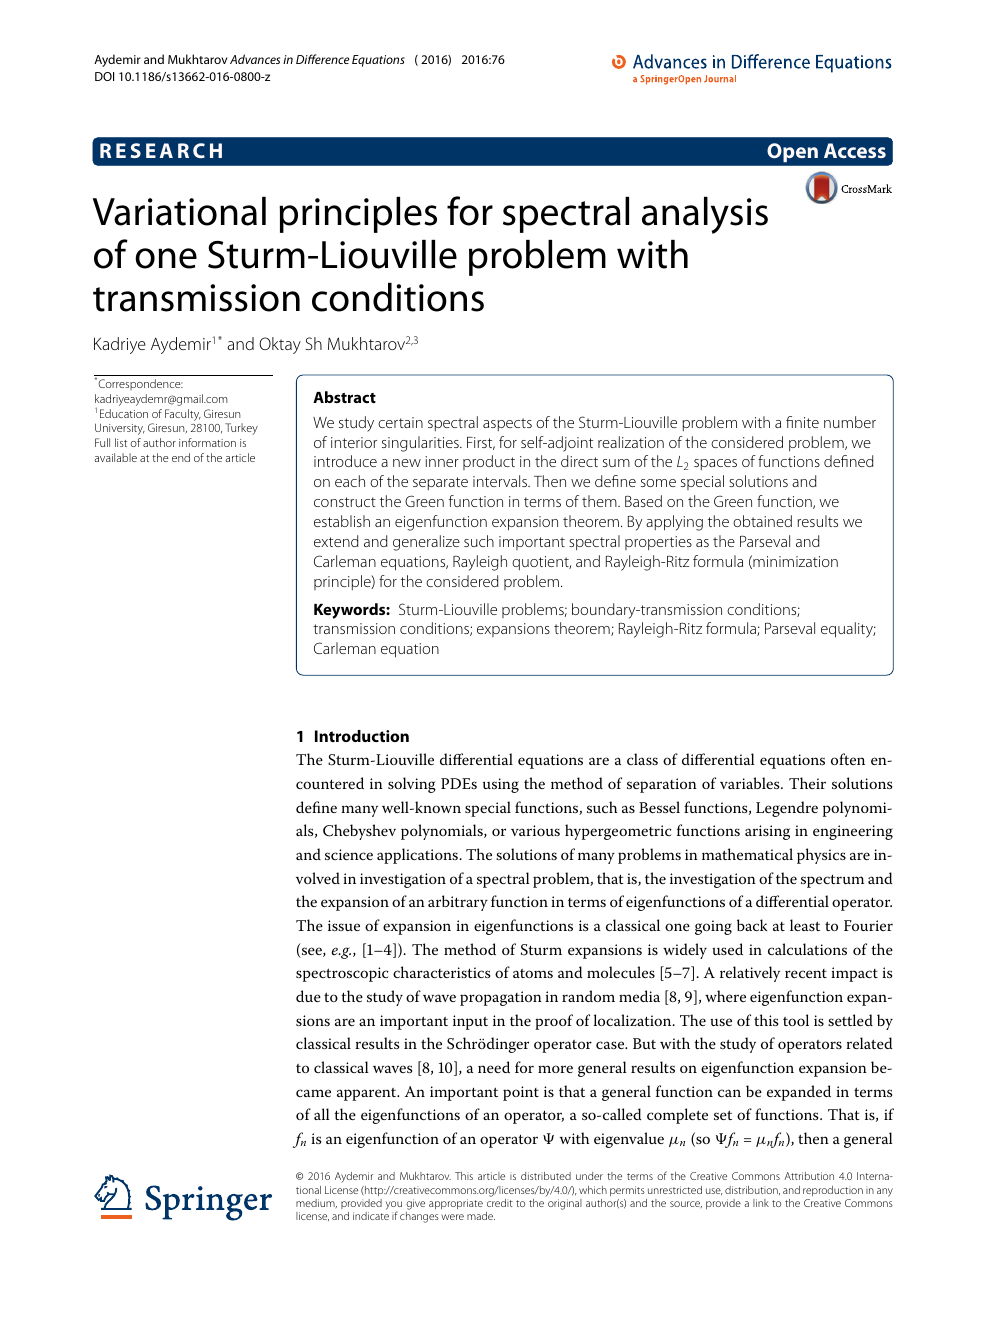 Variational Principles For Spectral Analysis Of One Sturm Liouville Problem With Transmission Conditions Topic Of Research Paper In Mathematics Download Scholarly Article Pdf And Read For Free On Cyberleninka Open Science Hub